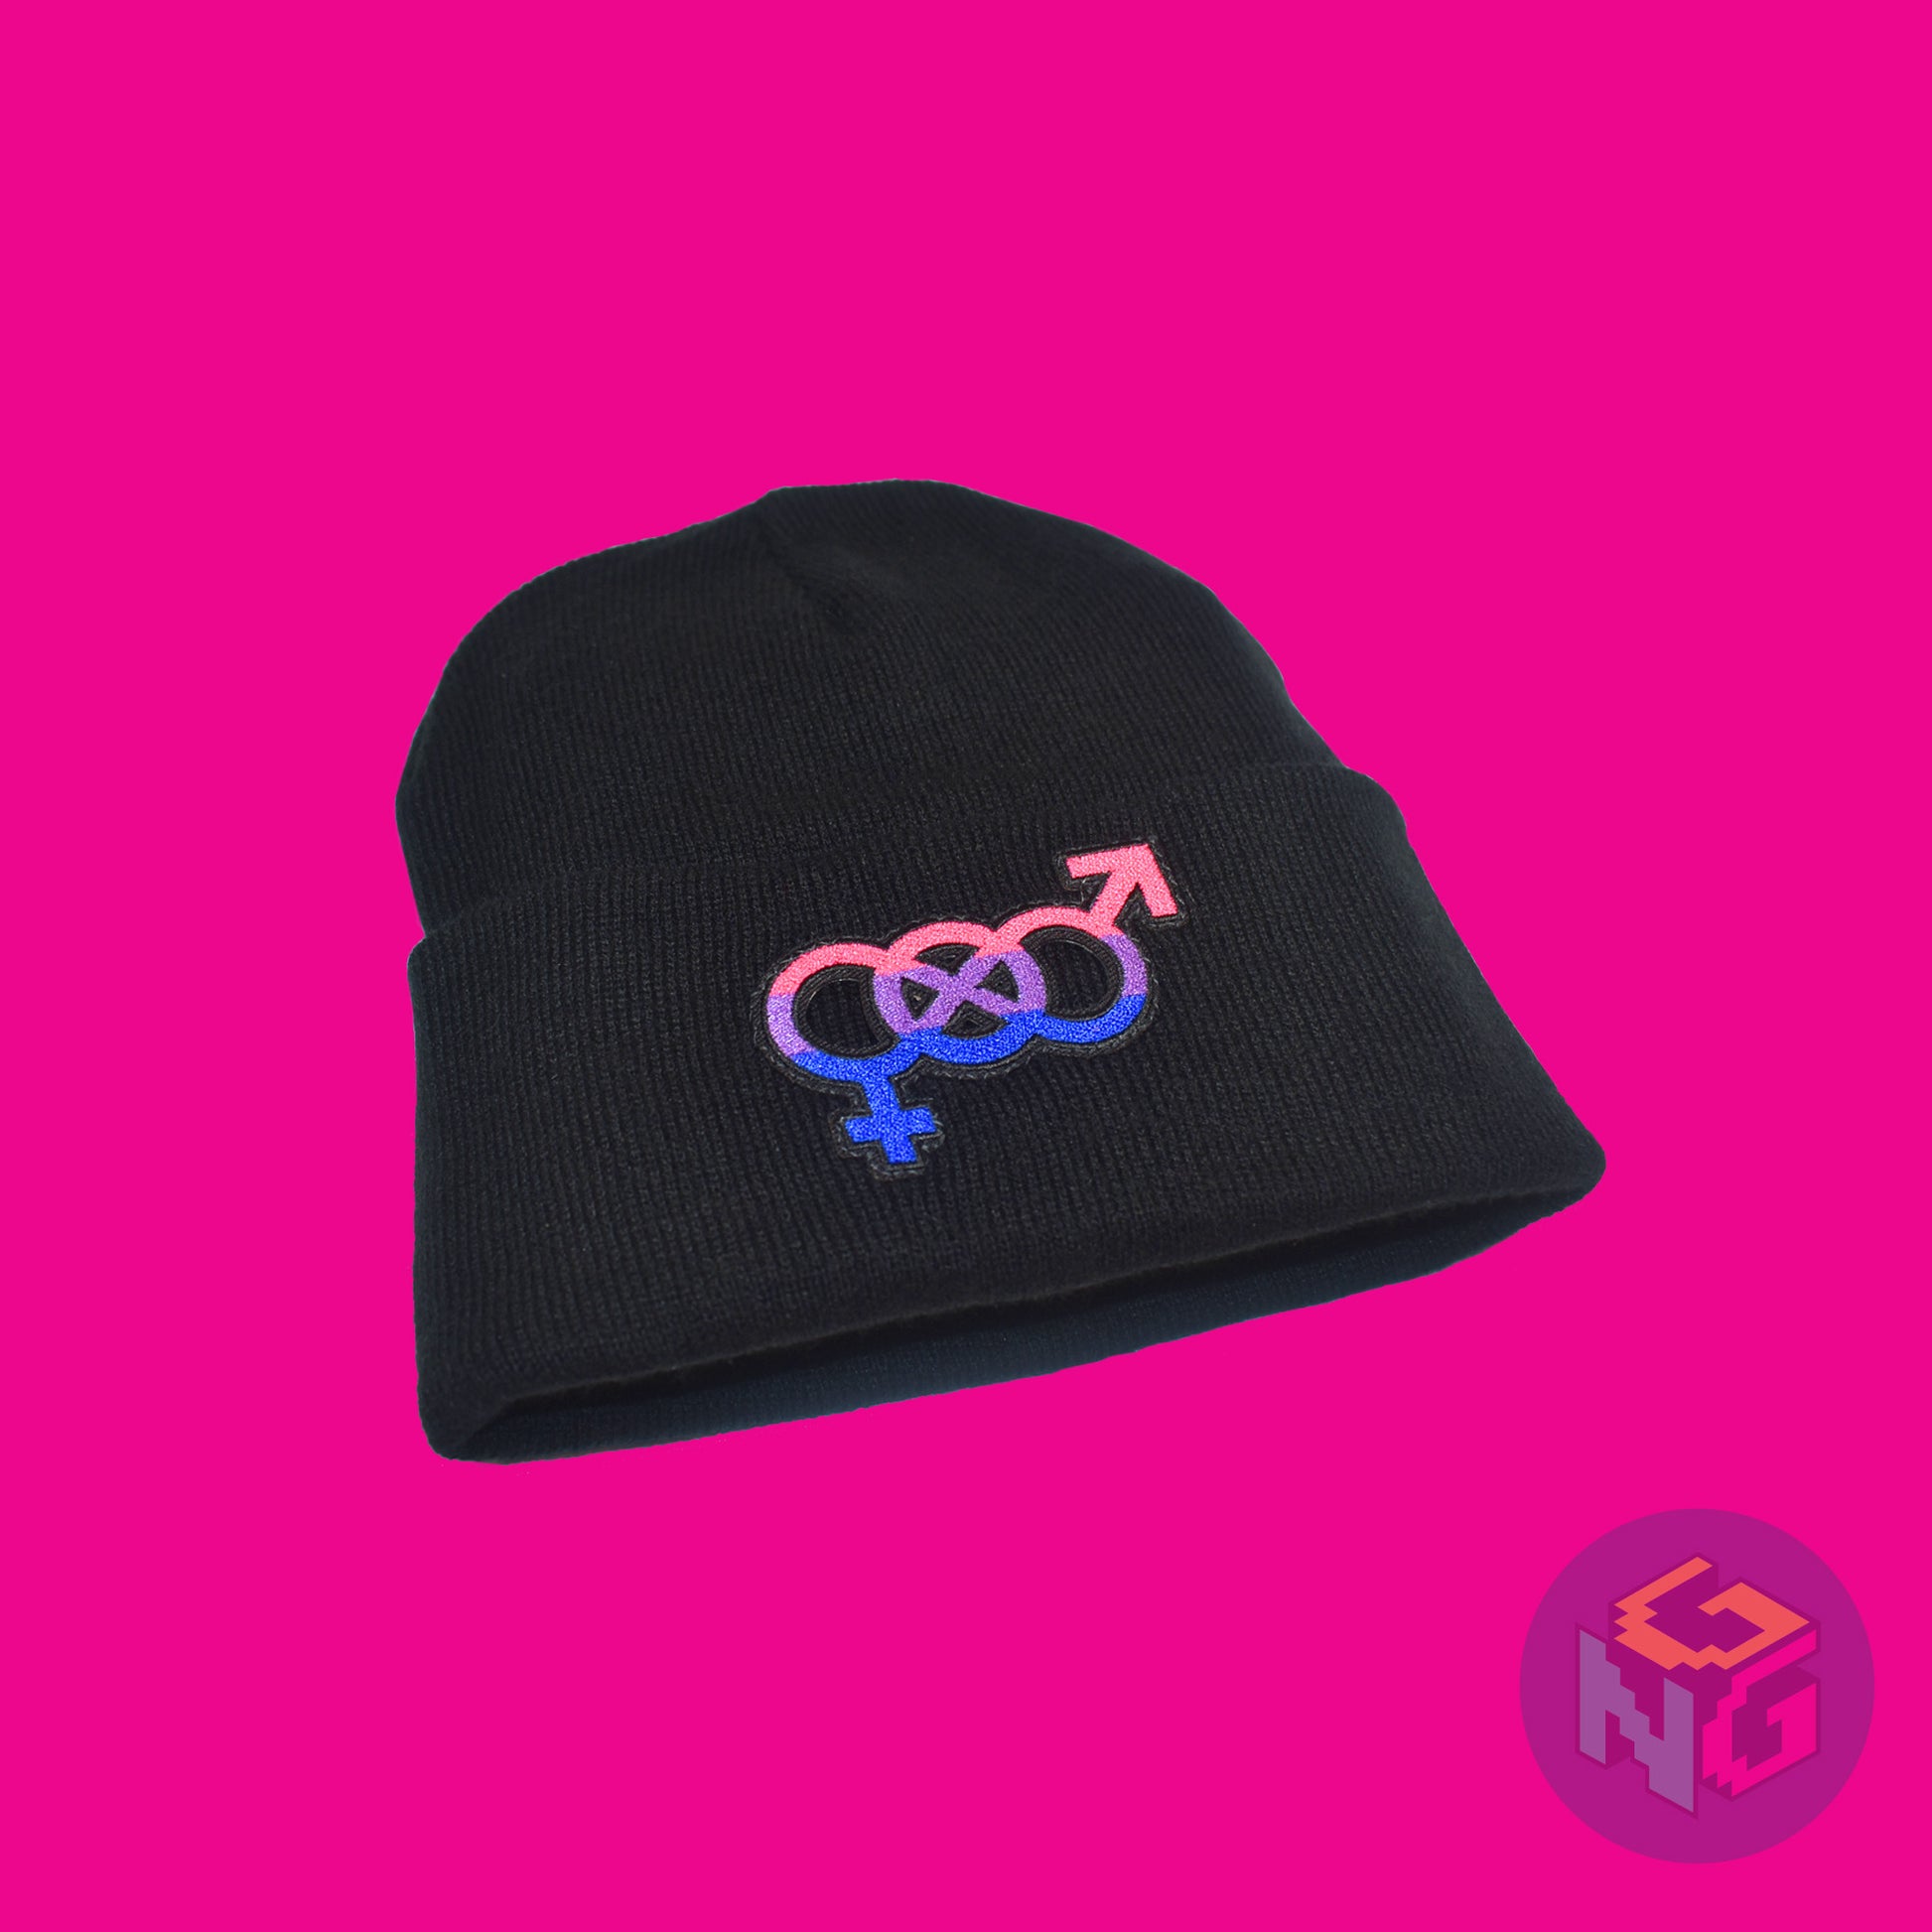 Black knit fabric beanie with the bisexual symbol in asexual pink, purple, and blue on the front. It is laying flat and seen at a low left angle on pink background